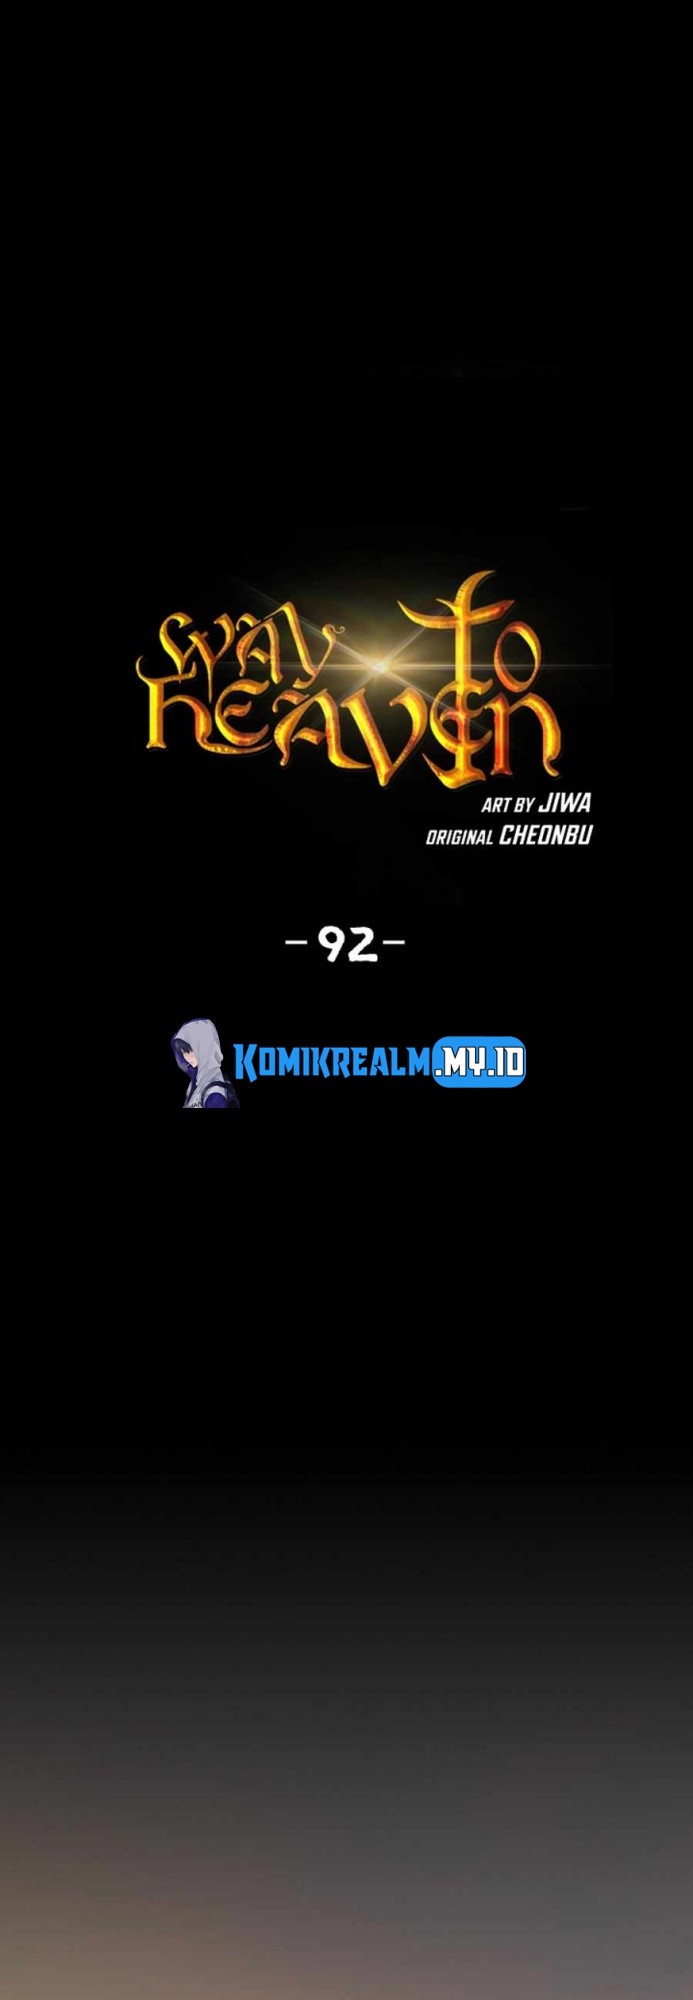 Way To Heaven Chapter 92